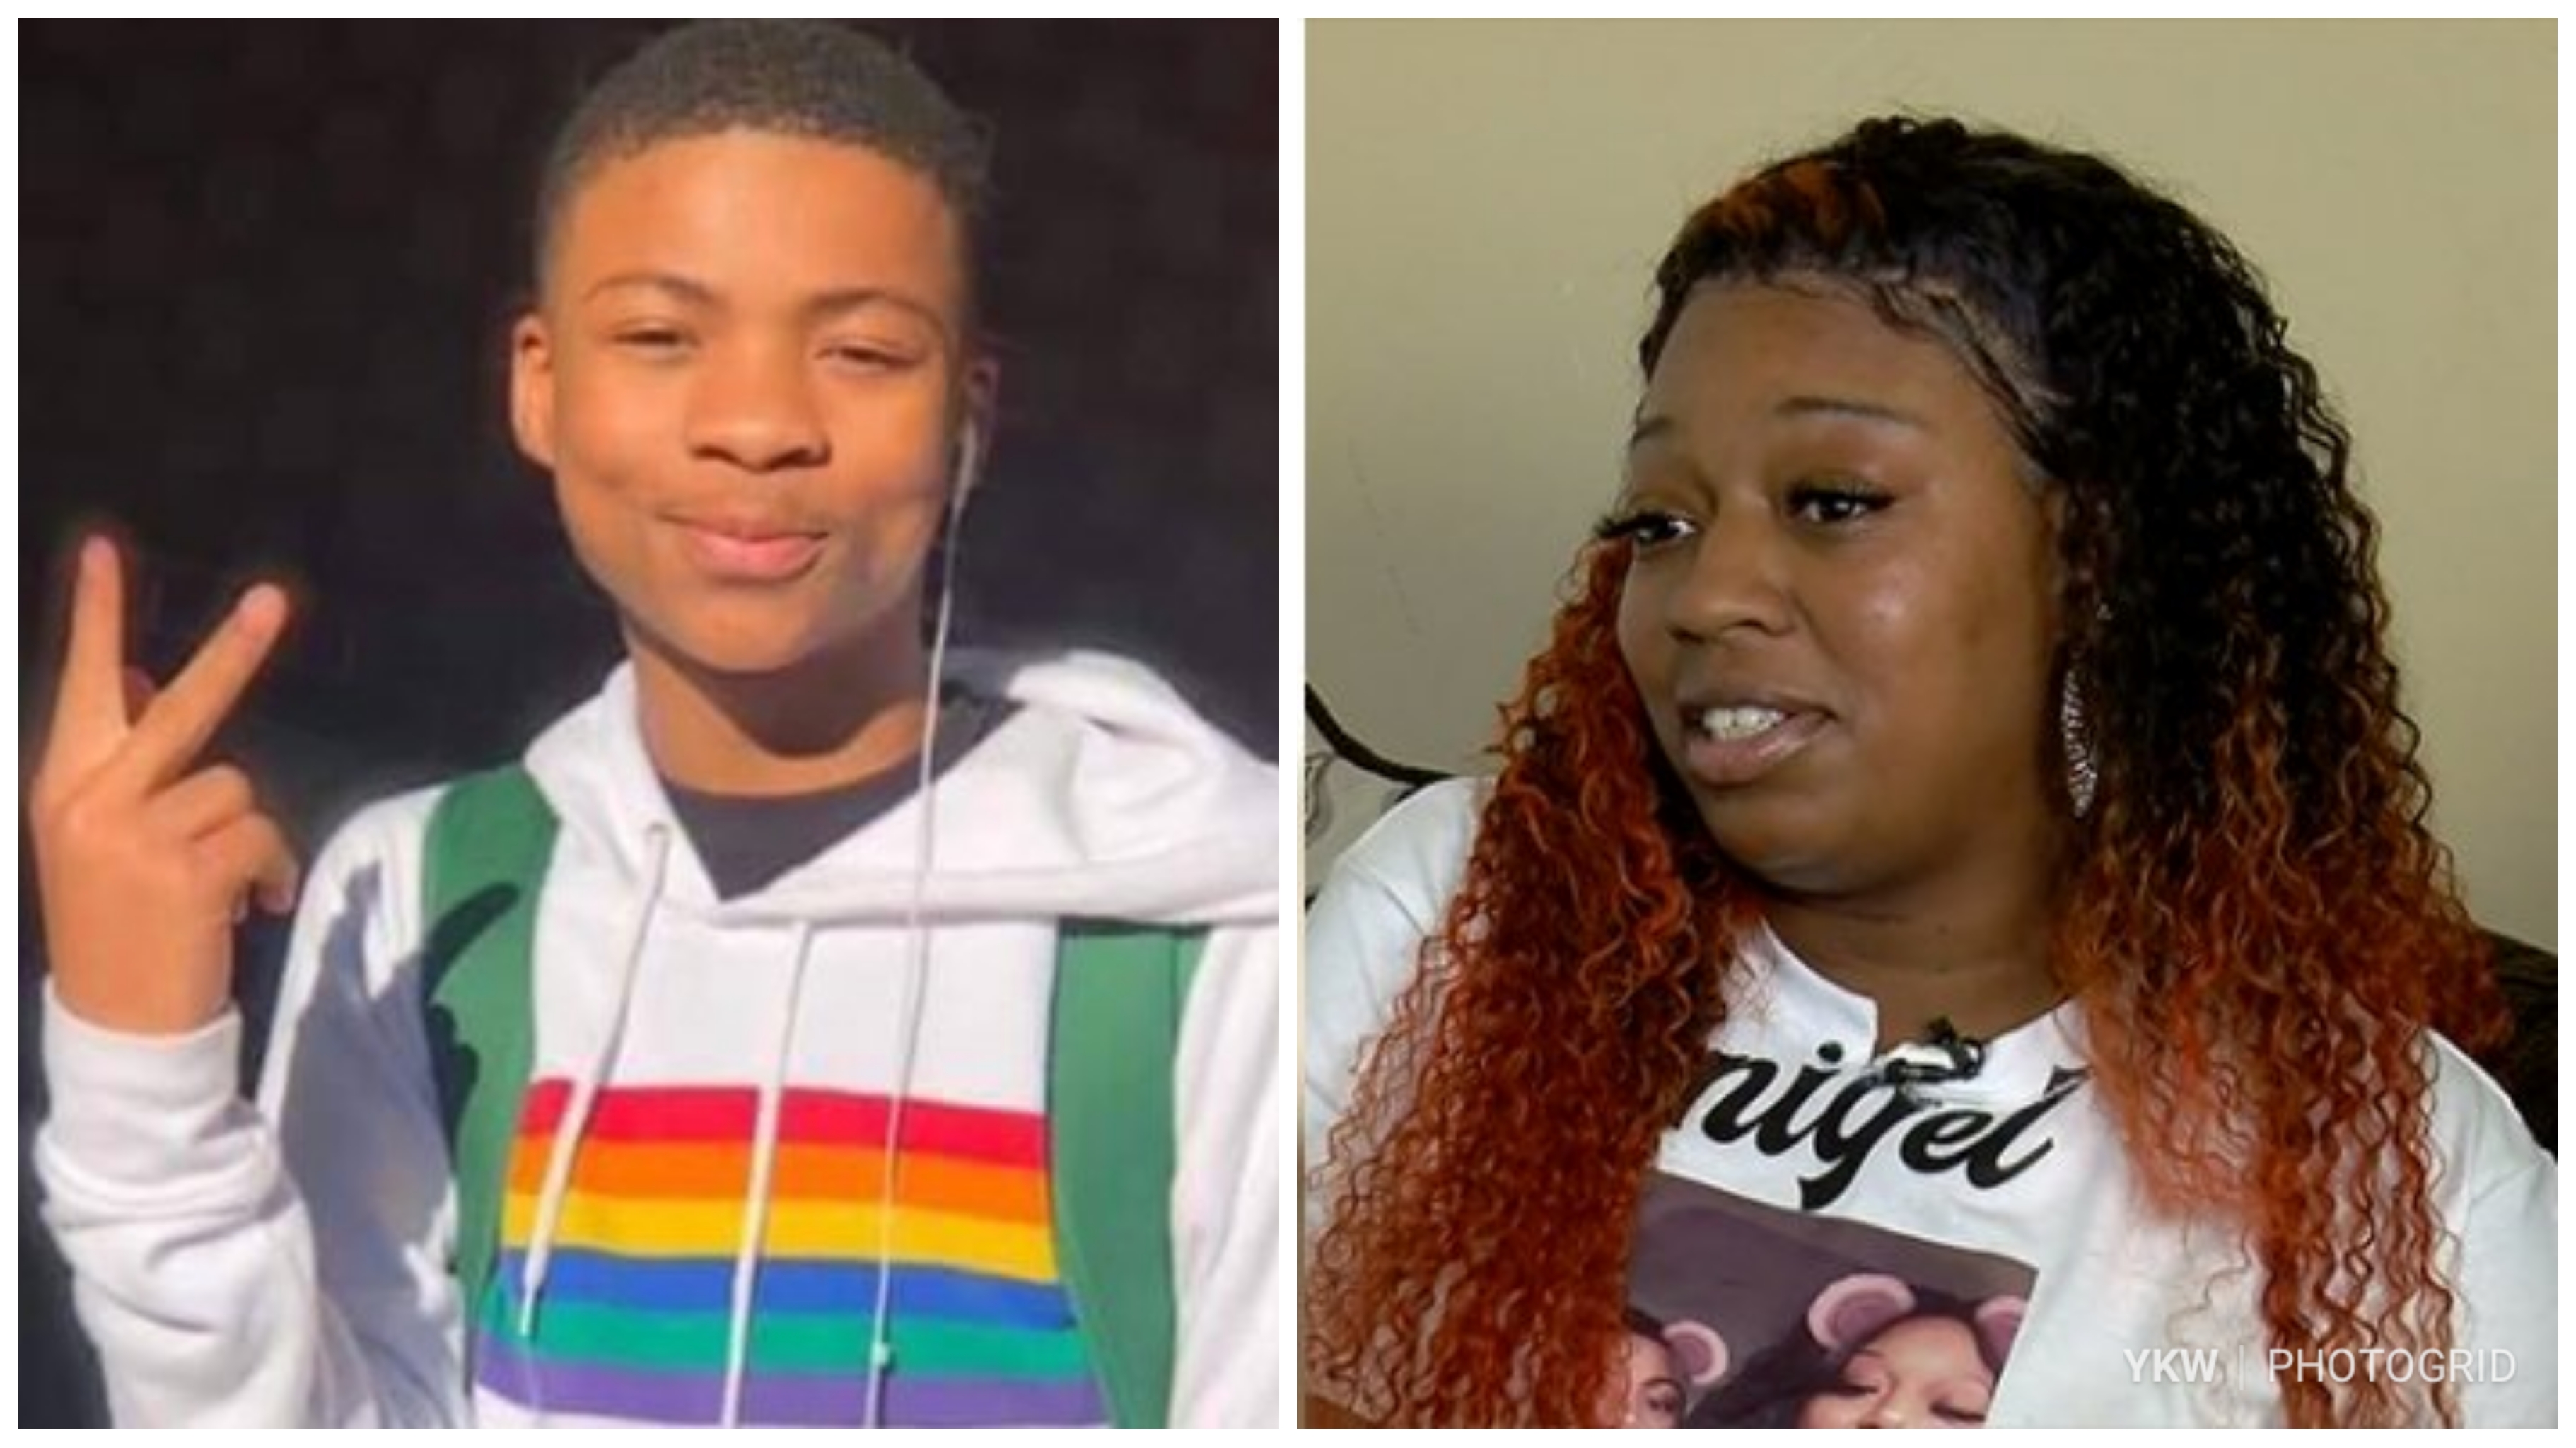 Nigel Shelby’s Mother Speaks Out About Her 15-Year Old Son Who Took His Own Life